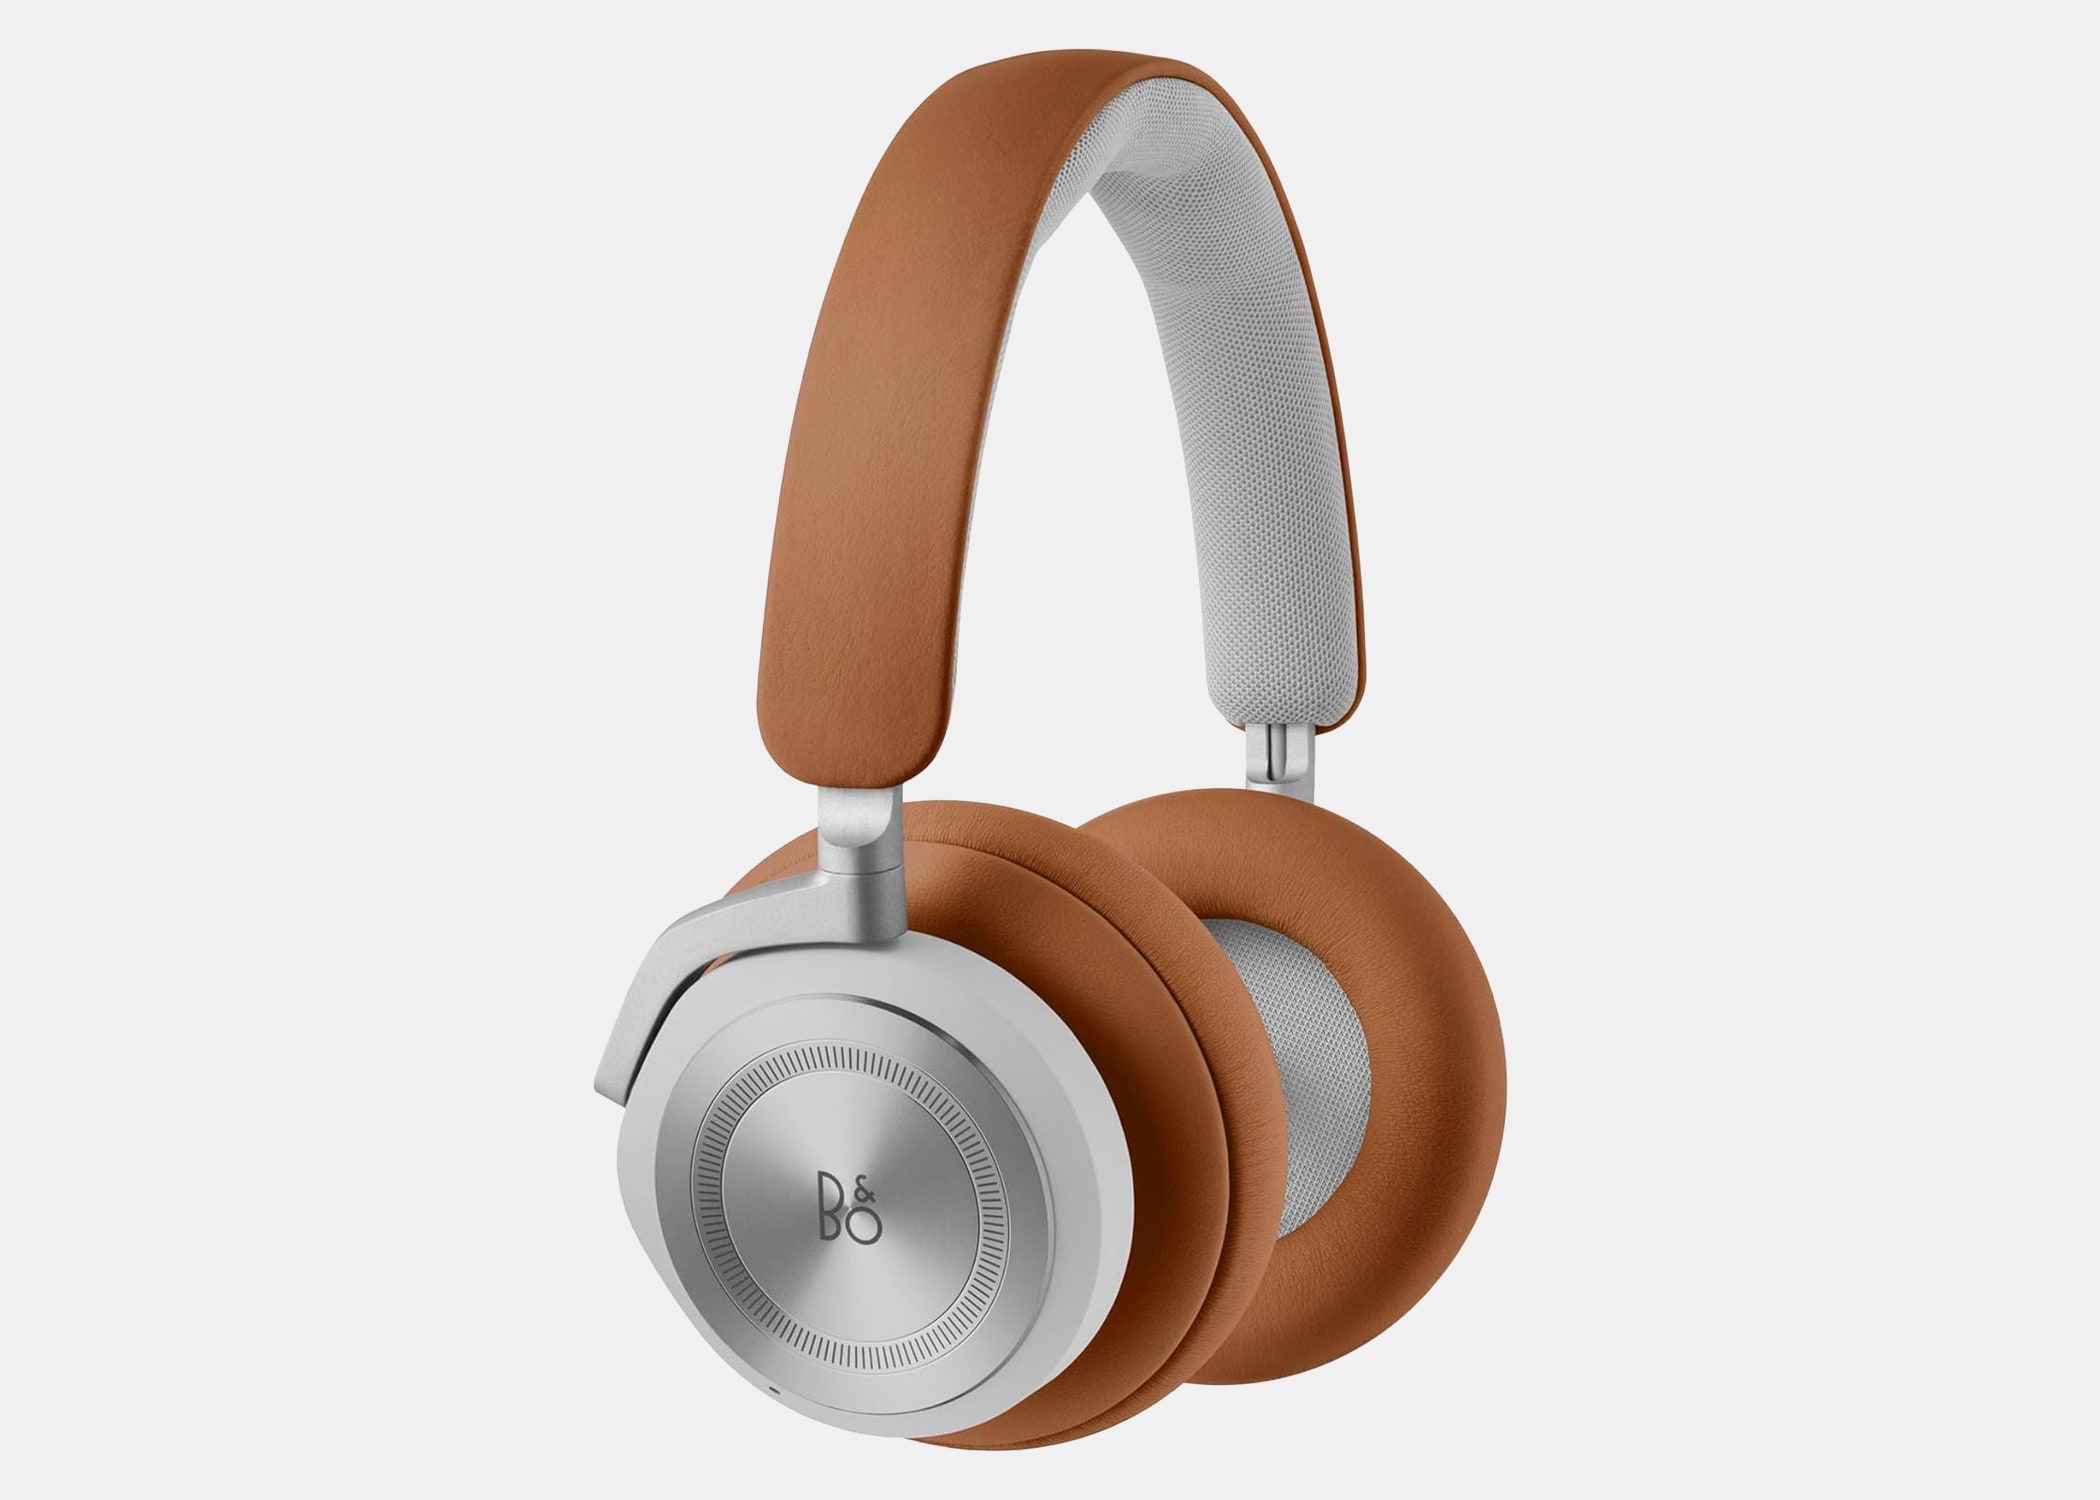 I got these headphones in mid-2021, but I had a previous design (B&O Play H7) for six years before handing them down to my partner when I upgraded. My ultimate happy place is watching a movie on an airplane seat screen—preferably something made before 2005—with my headphones plugged in and my WiFi turned off. No one can bother me, and I couldn’t even hear them if they tried. They look <em>so</em> sleek. In terms of functionality, these are super noise-canceling—sometimes I have to take them off just to remember that life is happening around me. A single charge has lasted every long-haul flight I’ve brought these on (12+ hours, in some cases) which deserves a medal of some sort. —<em><a href="https://www.cntraveler.com/contributor/erika-owen?mbid=synd_msn_rss&utm_source=msn&utm_medium=syndication">Erika Owens</a>, contributor</em> $599, Amazon. <a href="https://www.amazon.com/Bang-Olufsen-Beoplay-Comfortable-Headphones/dp/B08YJ3W1HB/ref=asc_df_B08YJ3W1HB/?">Get it now!</a><p>Sign up to receive the latest news, expert tips, and inspiration on all things travel</p><a href="https://www.cntraveler.com/newsletter/the-daily?sourceCode=msnsend">Inspire Me</a>